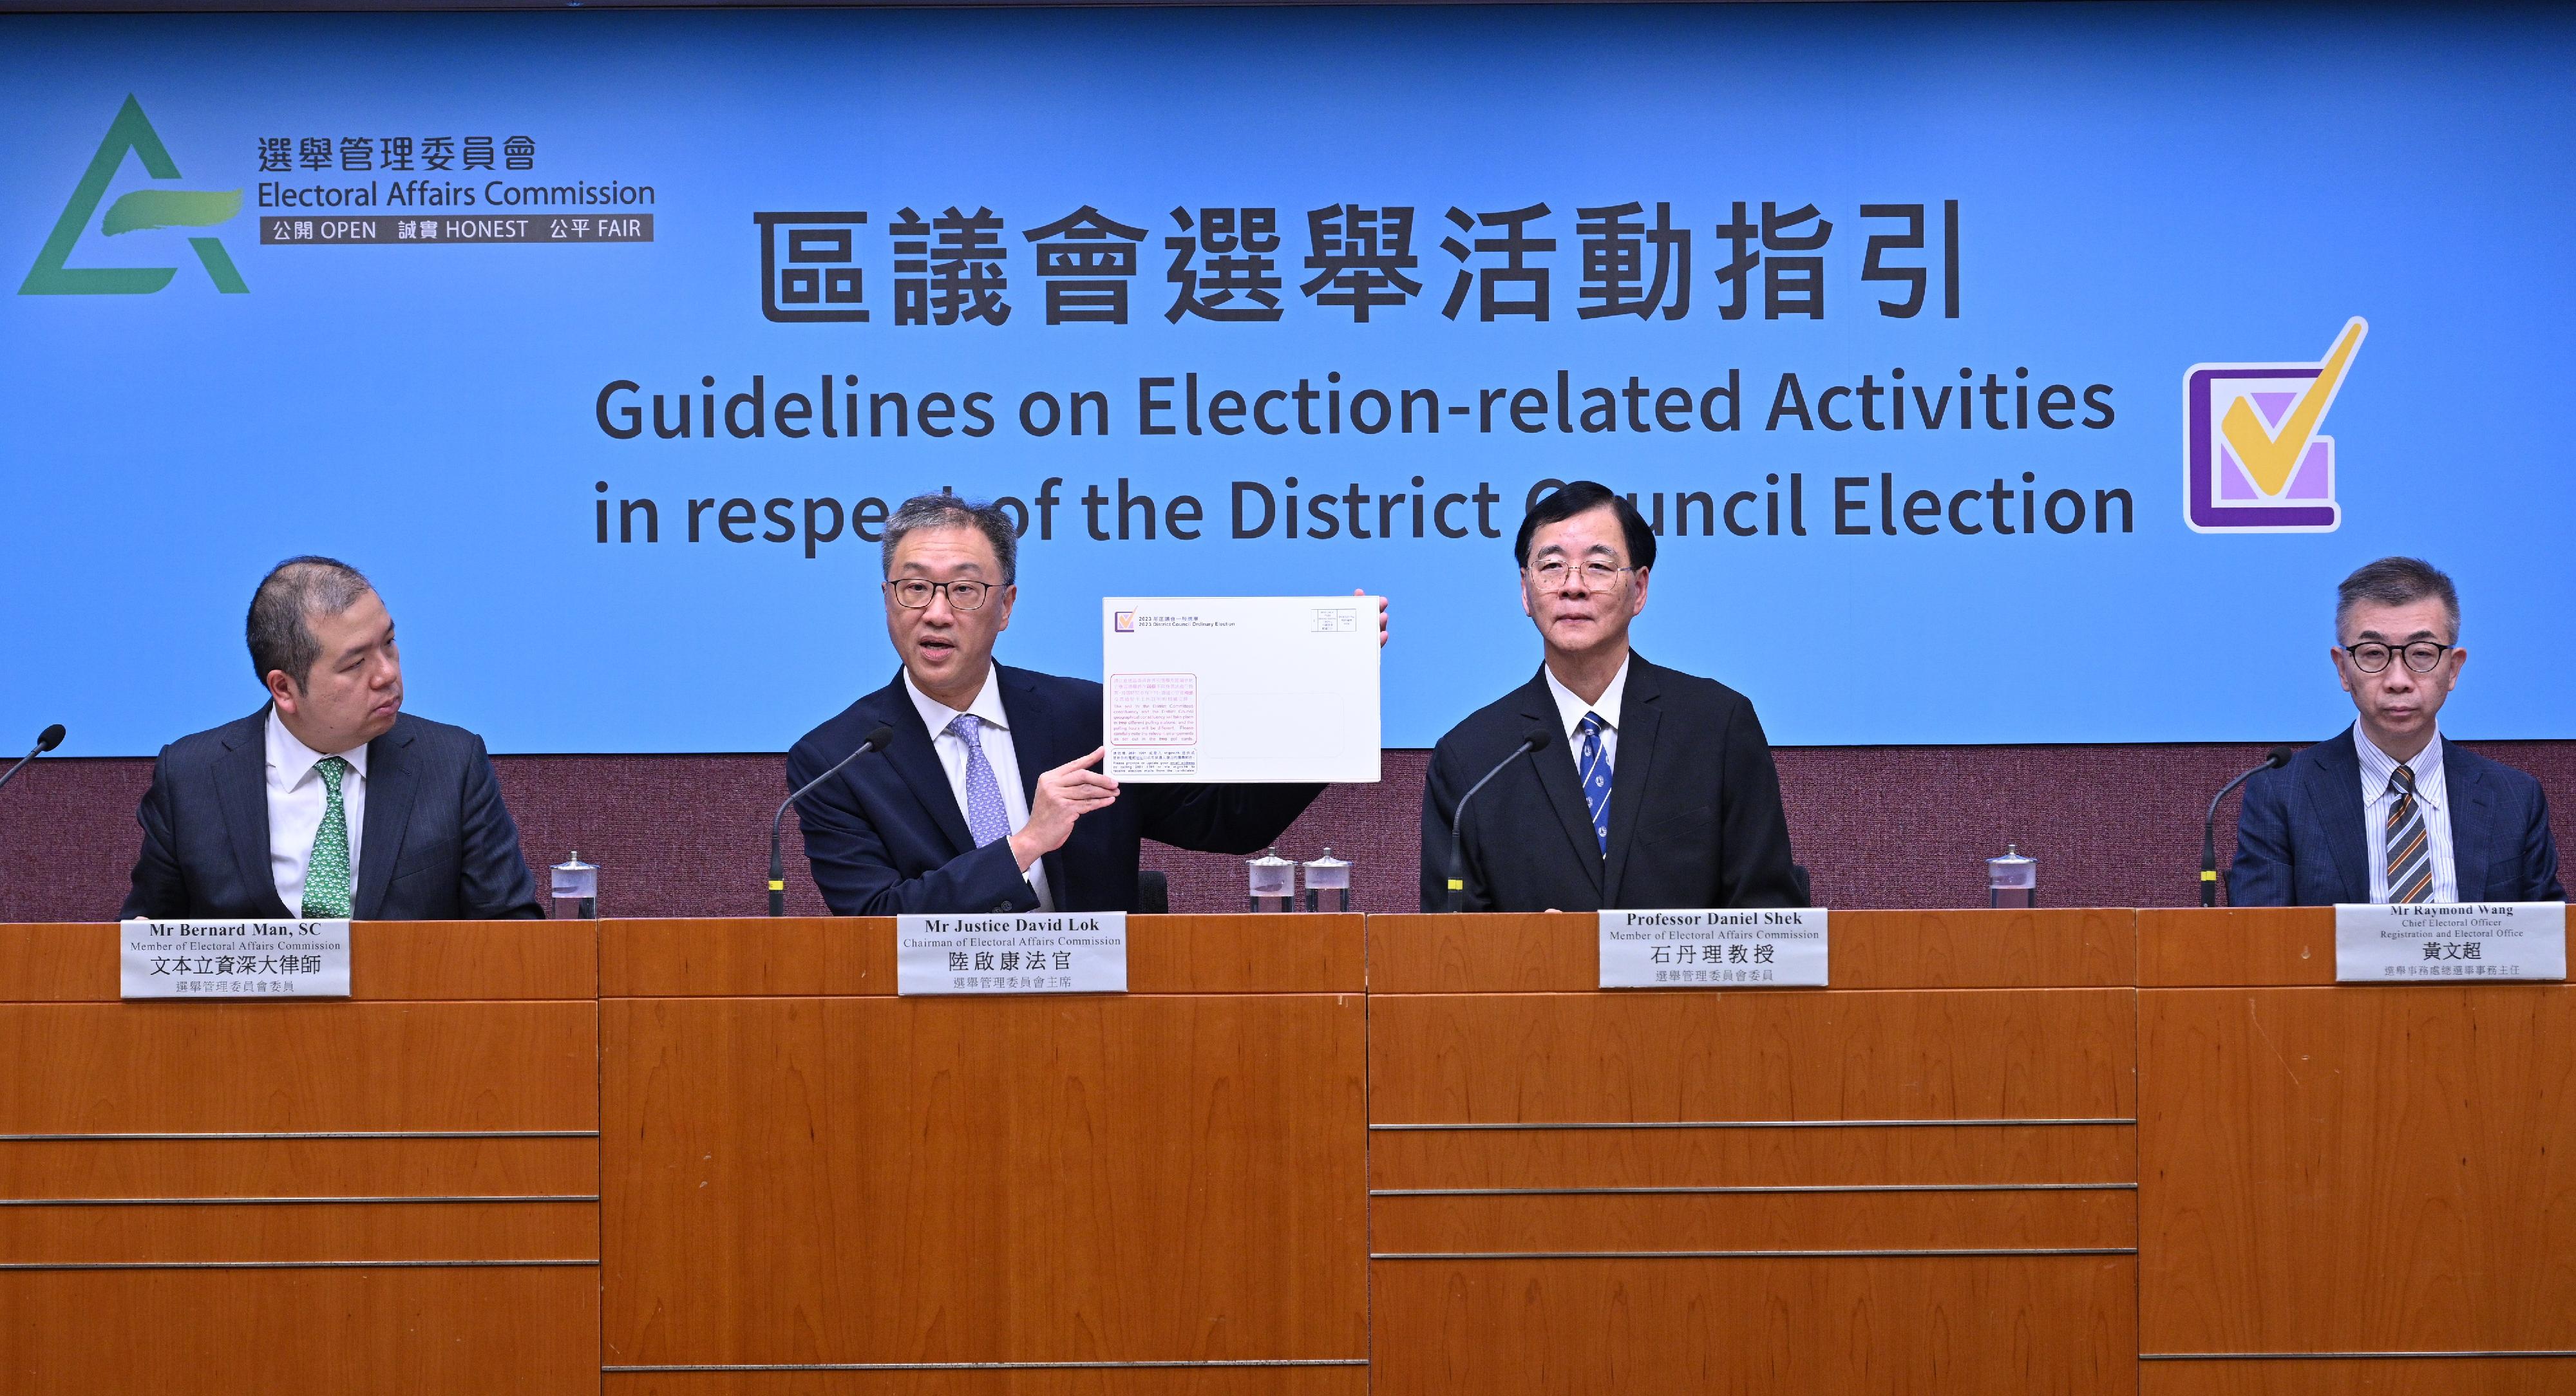 The Chairman of the Electoral Affairs Commission (EAC), Mr Justice David Lok, today (September 28) hosted the press conference on the Guidelines on Election-related Activities in respect of the District Council Election. Photo shows Mr Justice Lok (second left) showing a sample envelope for the poll cards issued by the Registration and Electoral Office to District Committees constituency (DCC) electors to remind them that the poll for the DCCs and the District Council geographical constituencies will take place in two different polling stations. Also present are EAC members Professor Daniel Shek (second right) and Mr Bernard Man, SC (first left), and the Chief Electoral Officer of the Registration and Electoral Office, Mr Raymond Wang (first right).